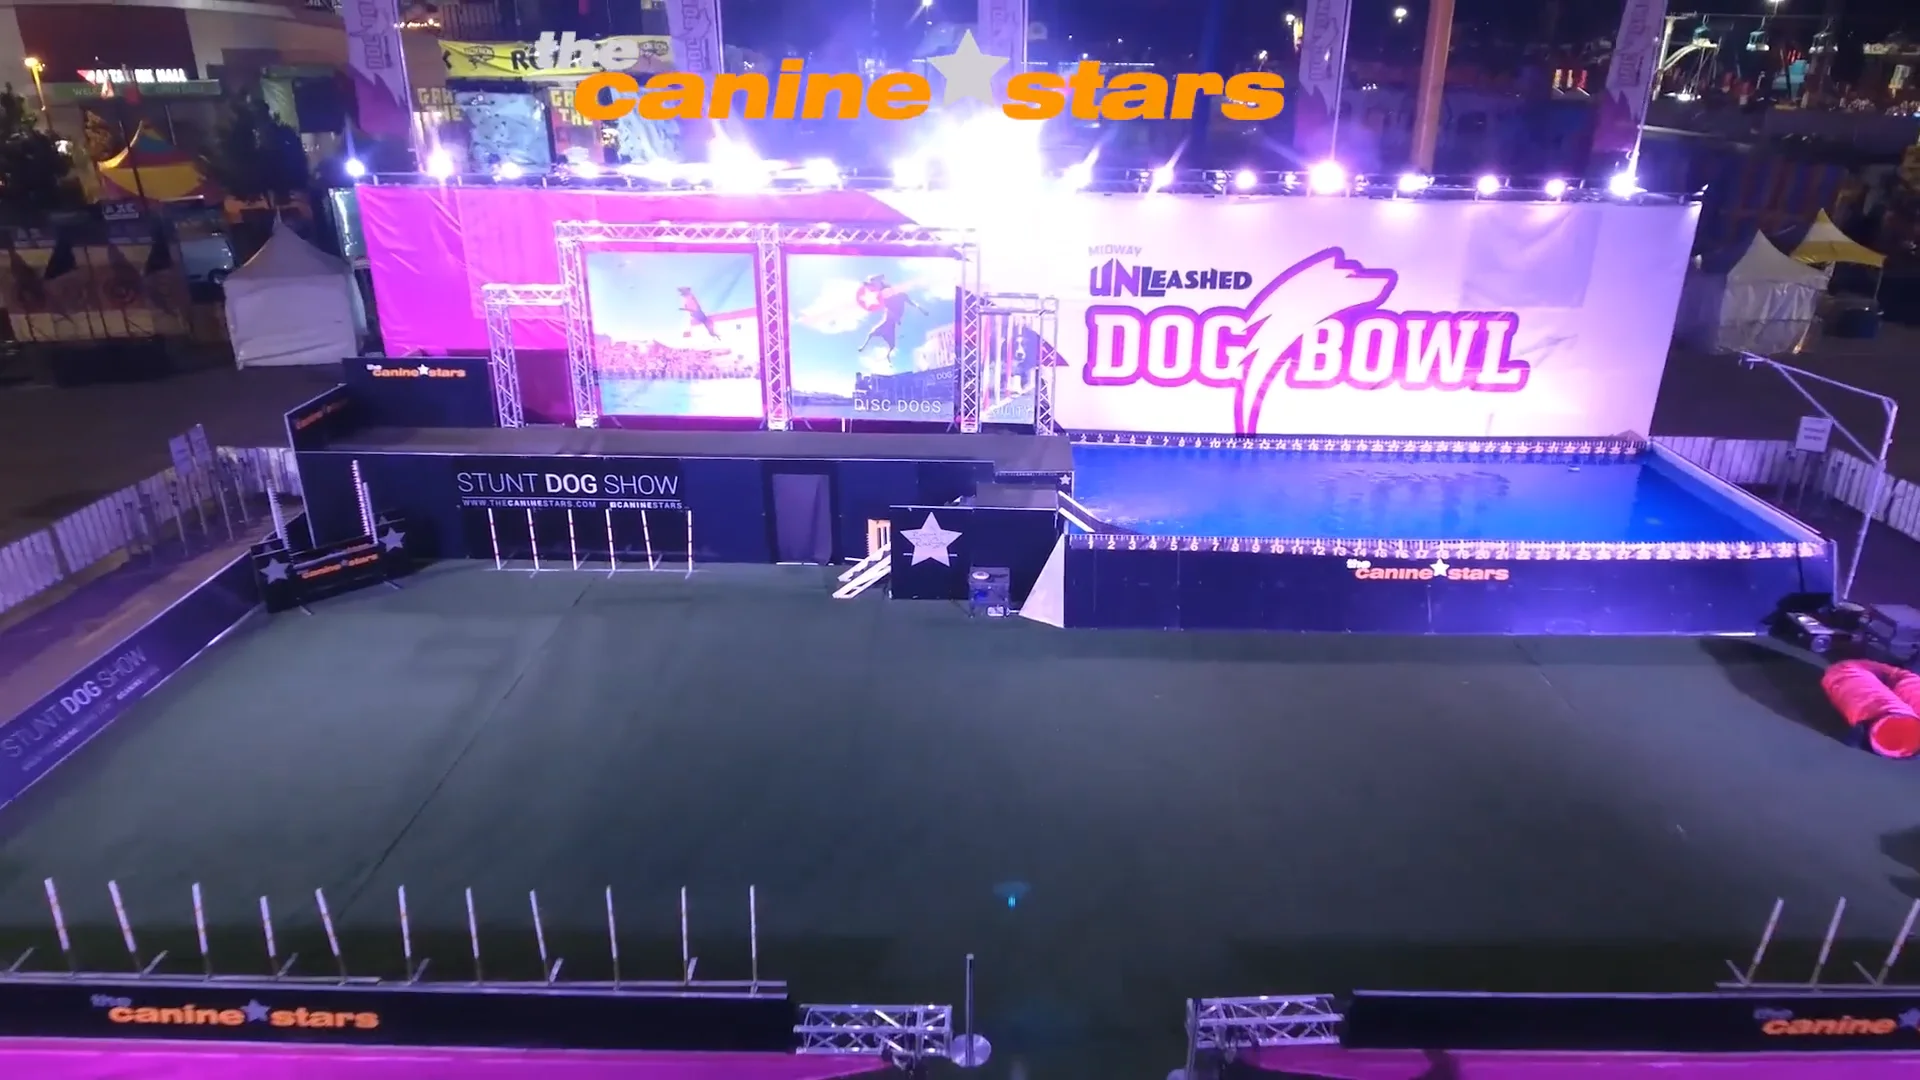 Stunt Dog Show  Entertainment Act by The Canine Stars